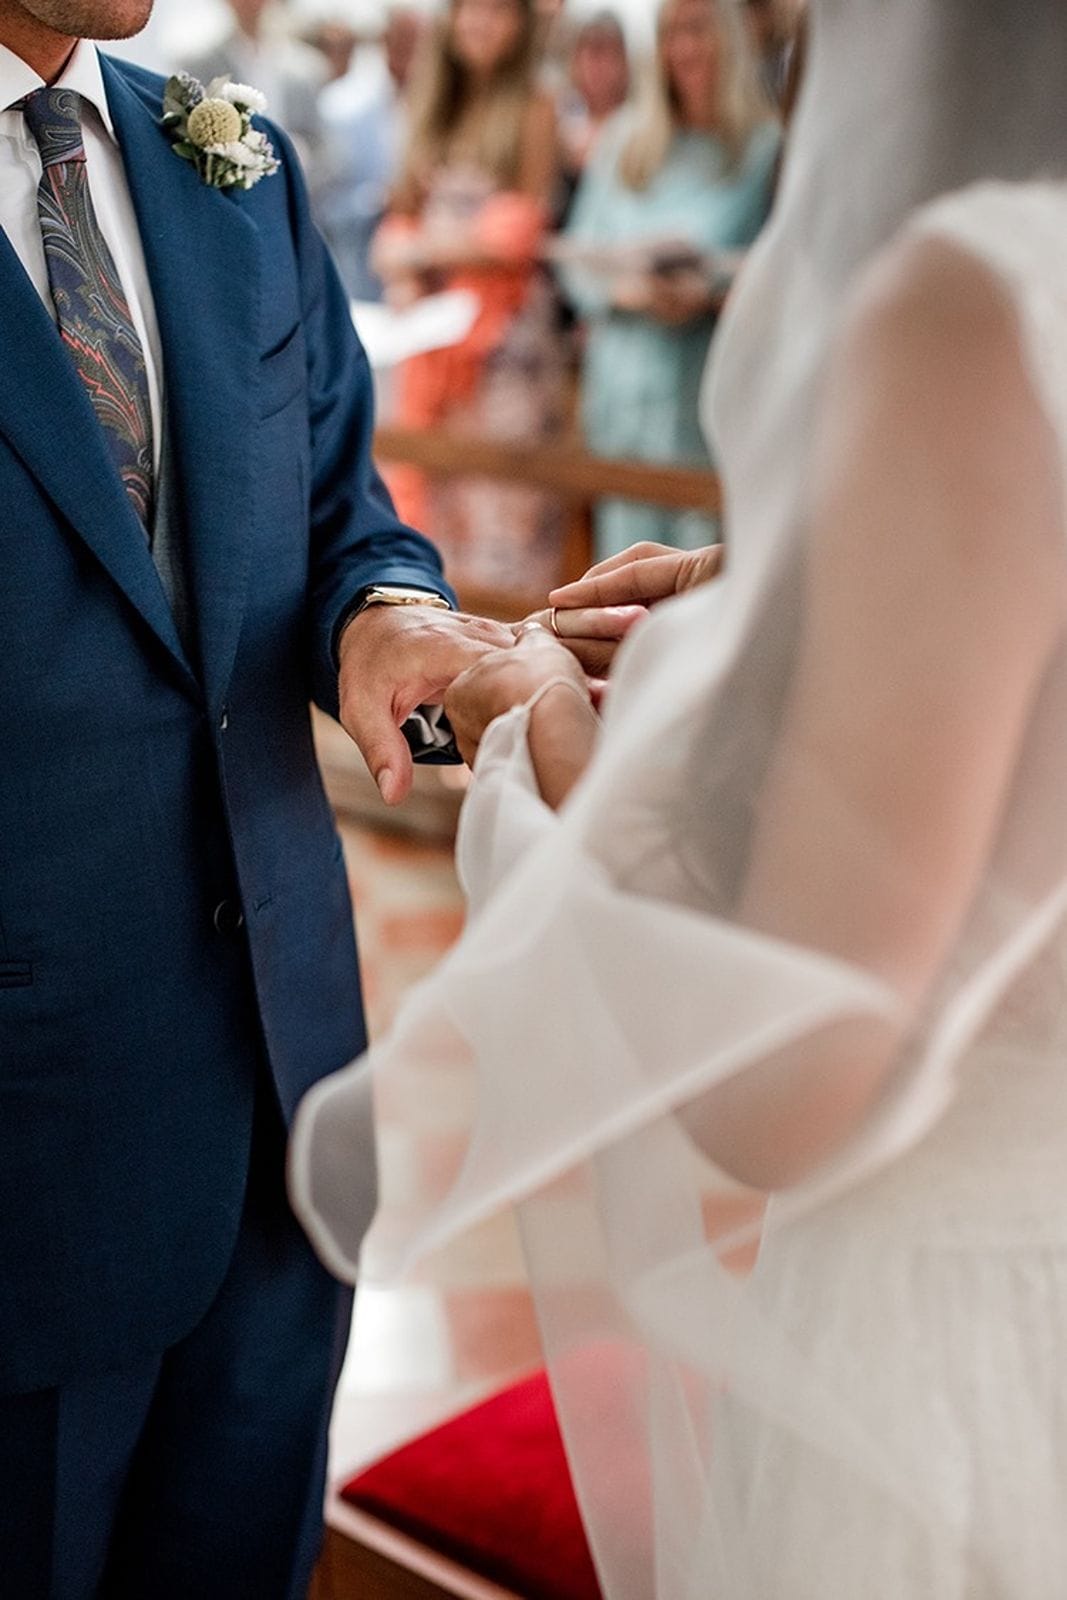 Groom places wedding ring on bride's finger during wedding ceremony